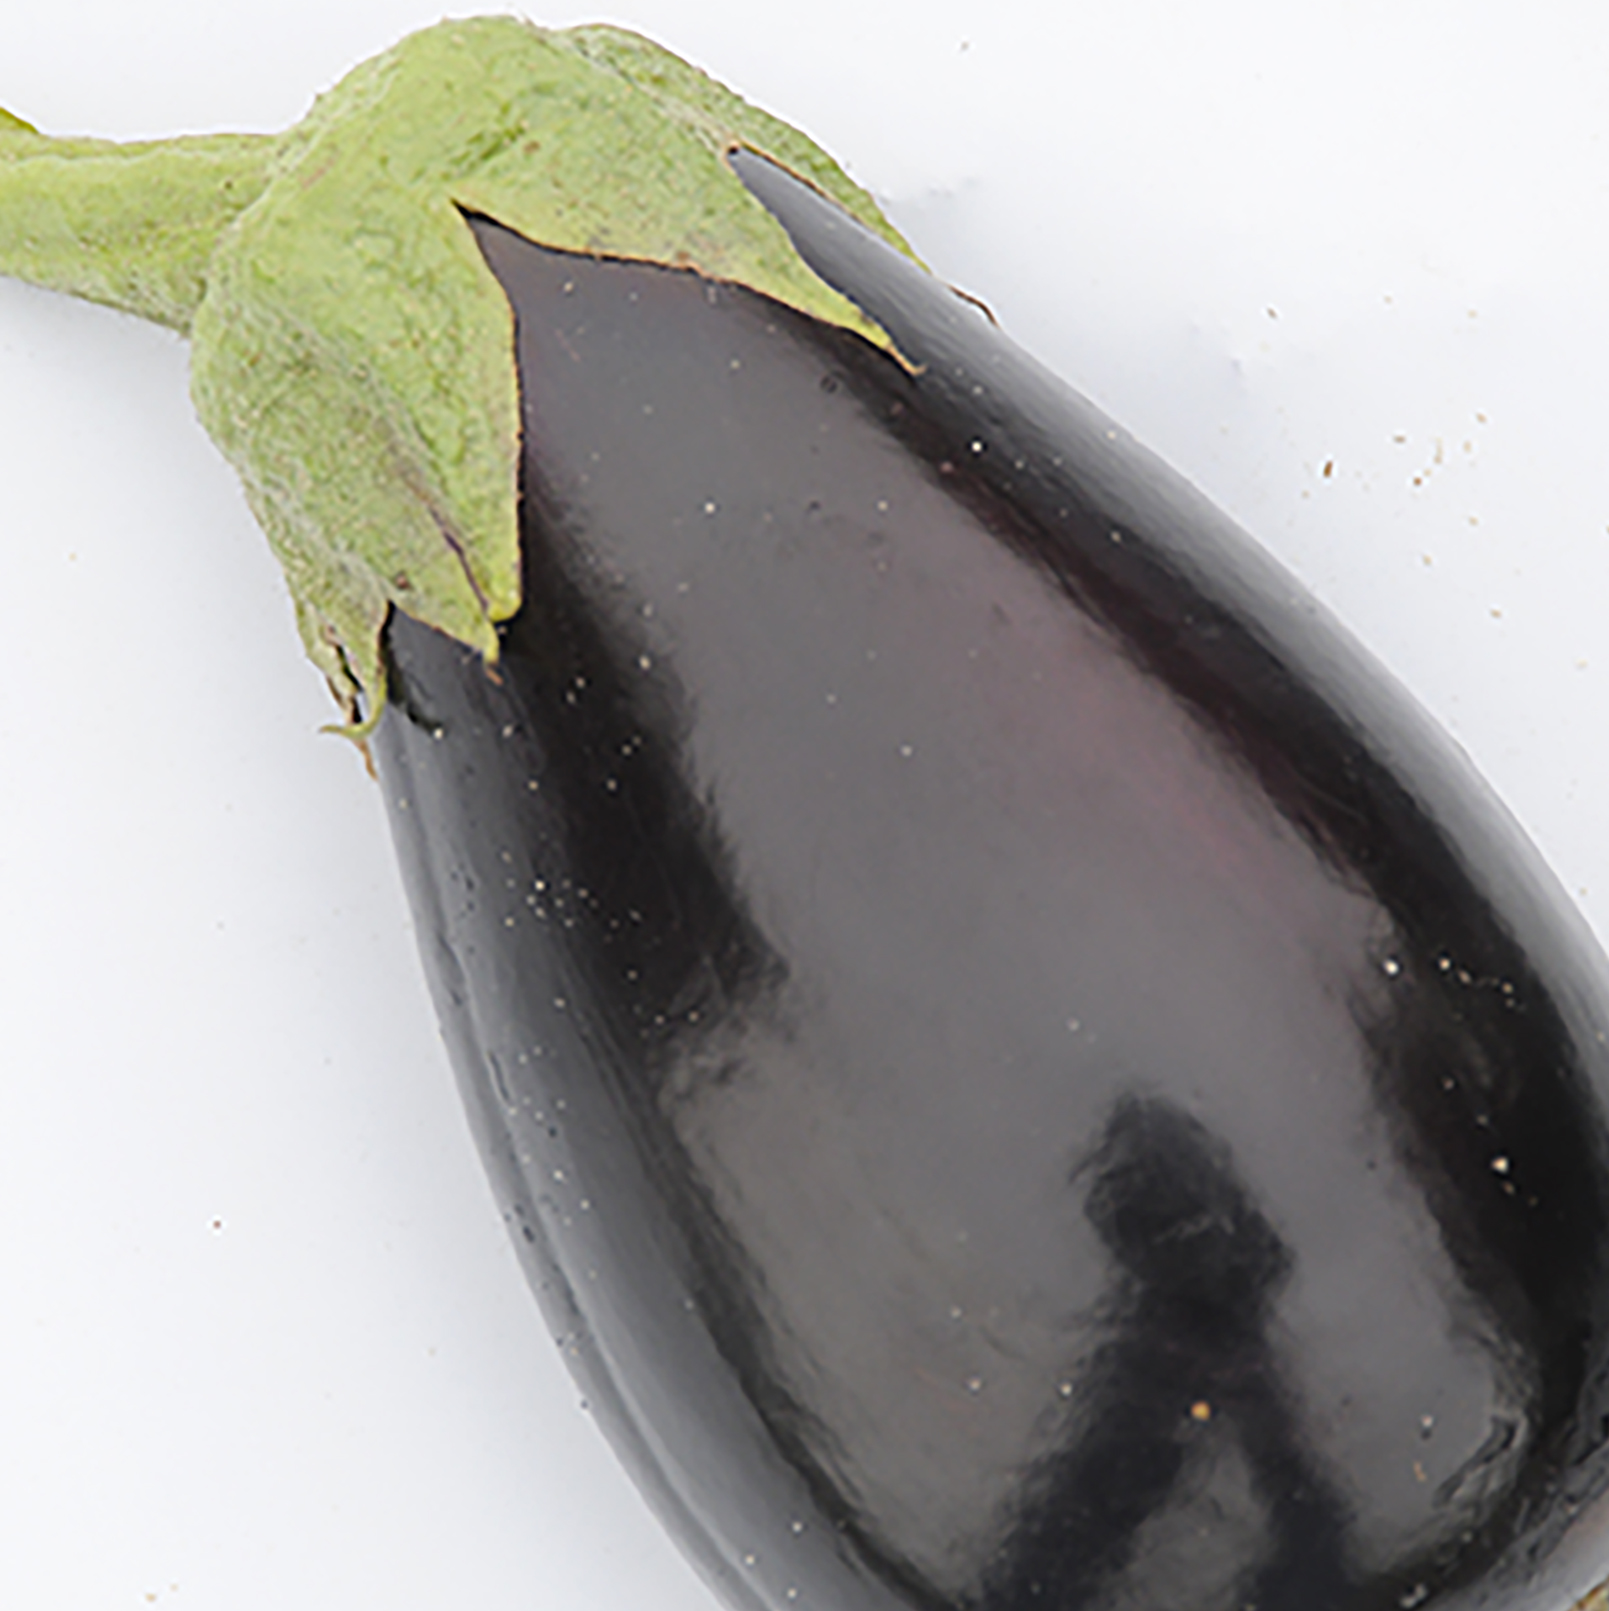 Pictured is an eggplant fruit.